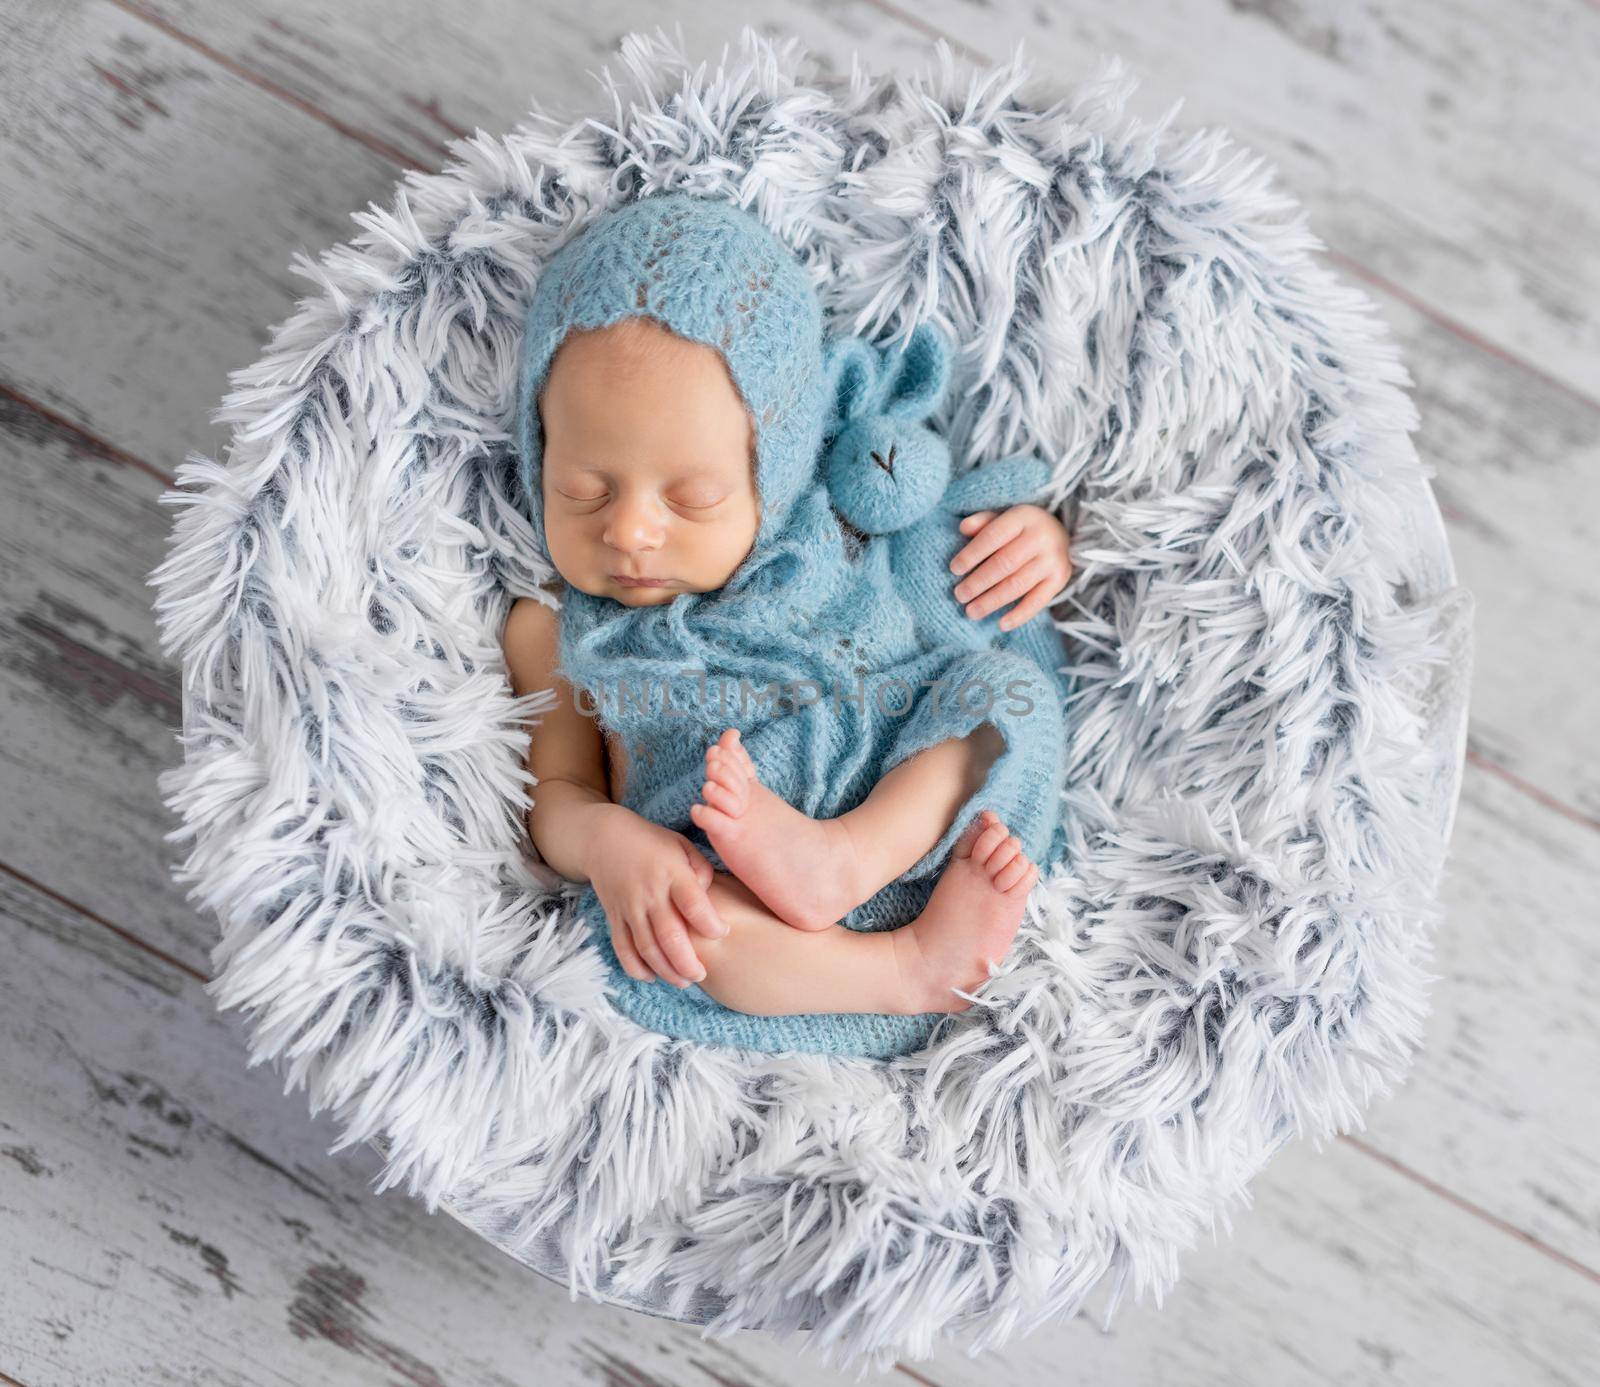 lovely infant in hat and jumpsuit sleeping on round little bed, top view